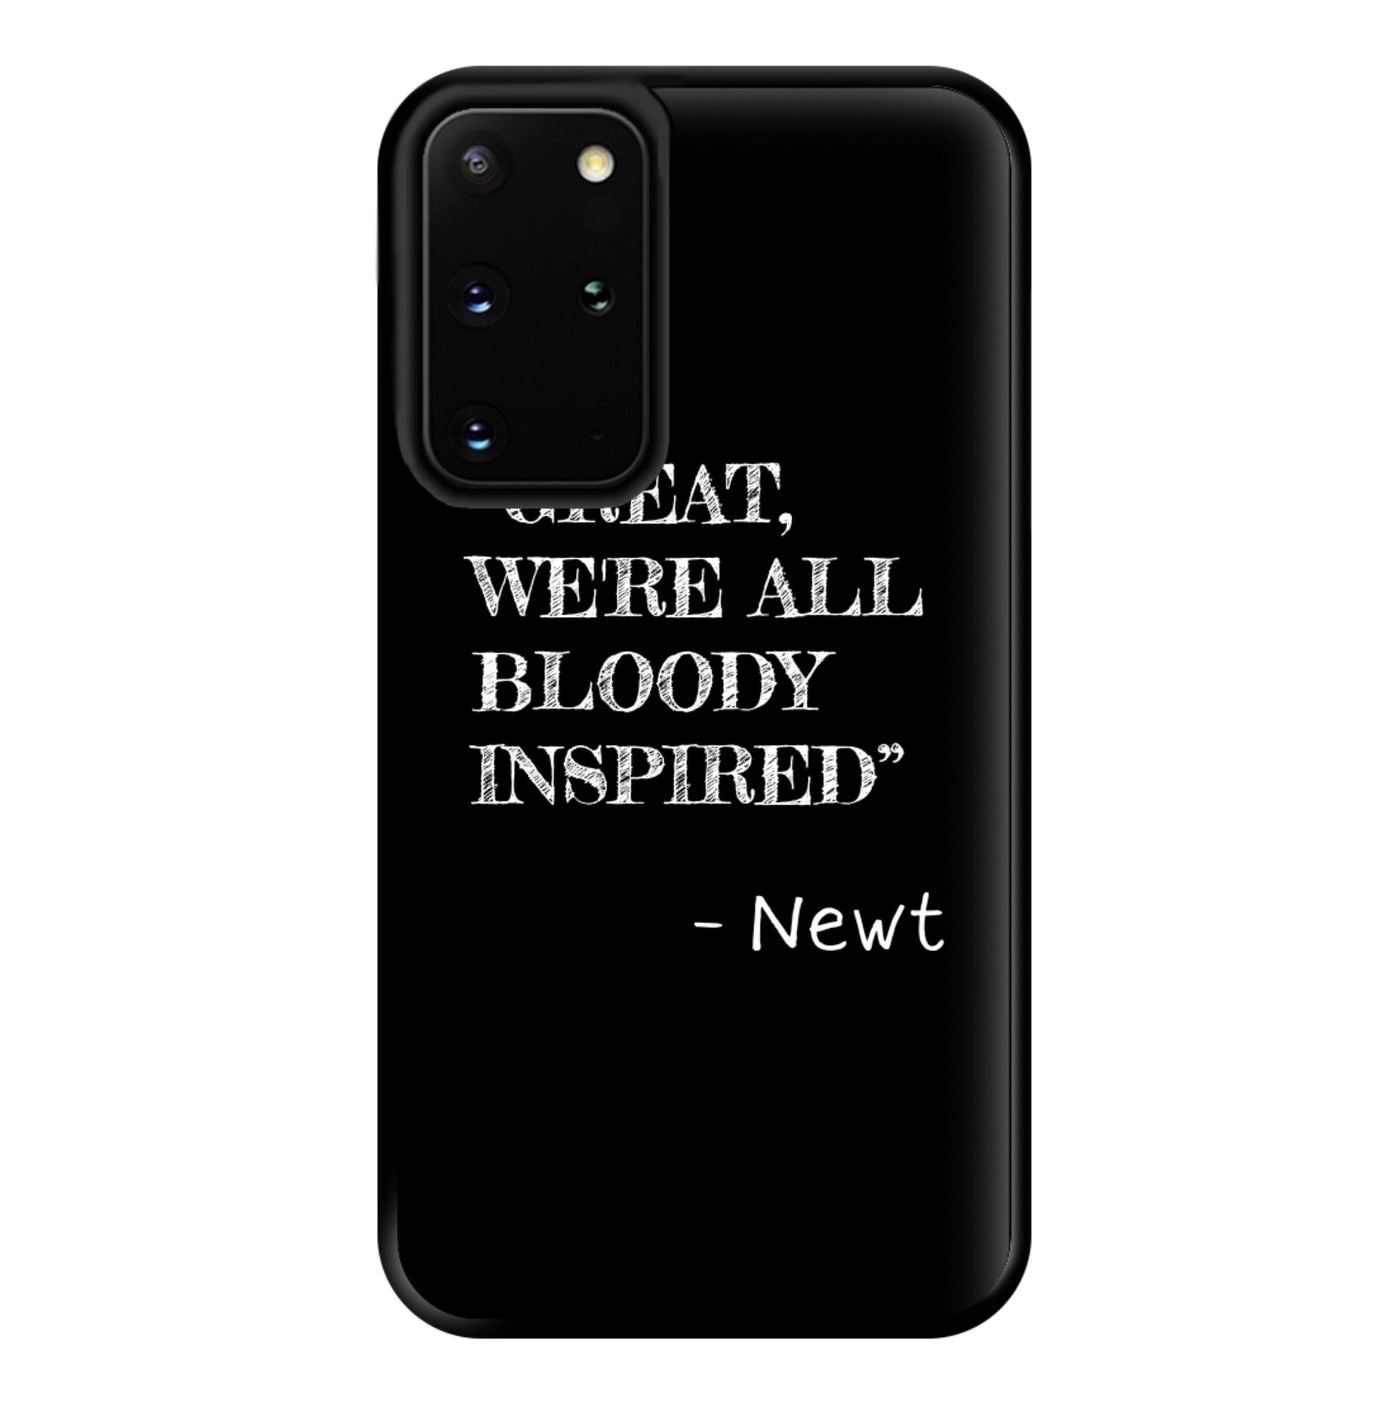 Great, We're All Bloody Inspired - Newt Phone Case